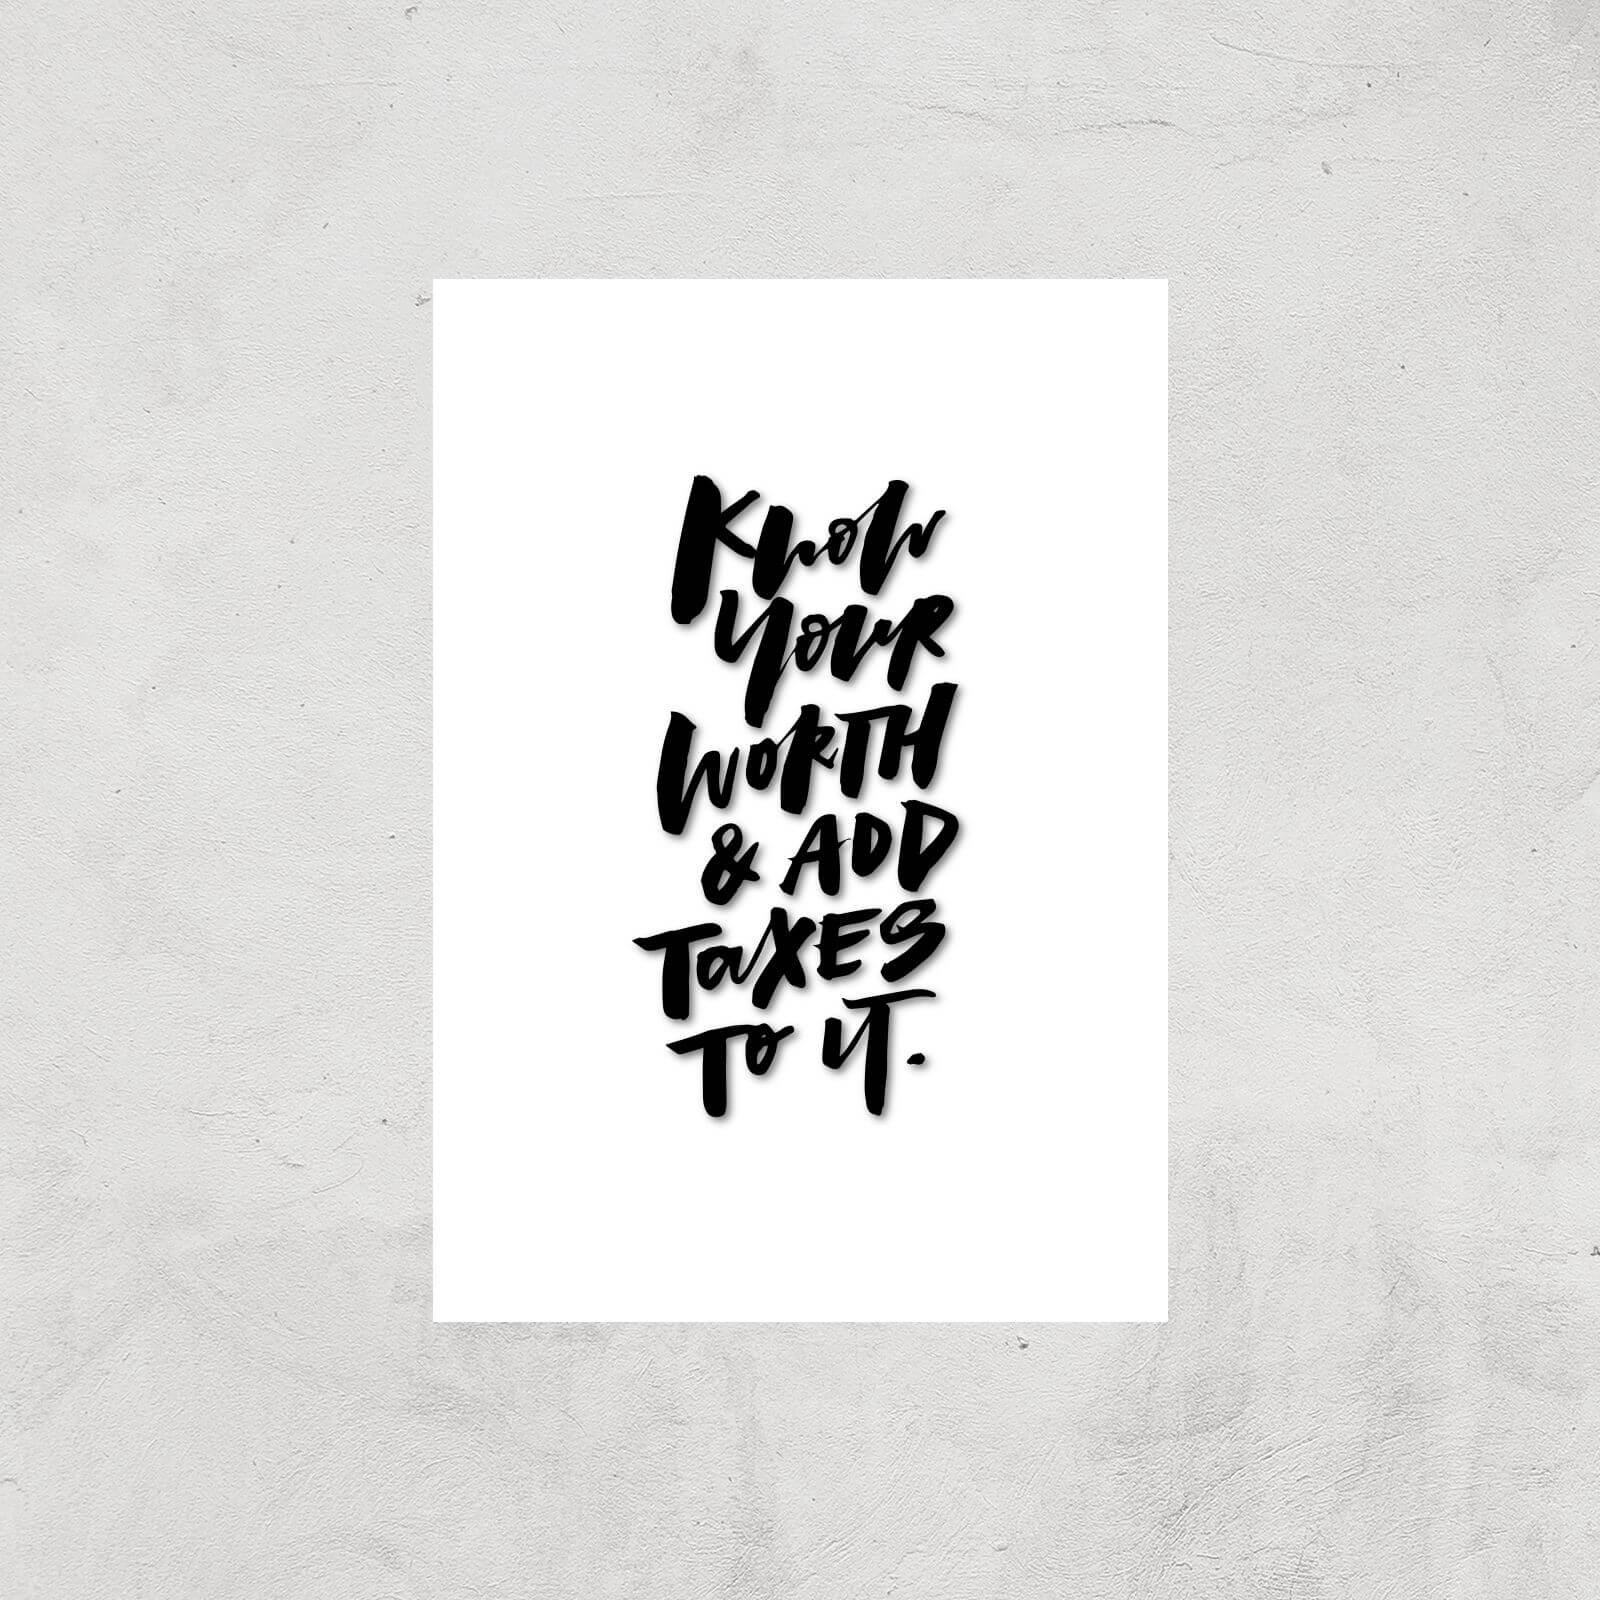 PlanetA444 Know Your Worth and Add Taxes To It Art Print - A2 - Print Only